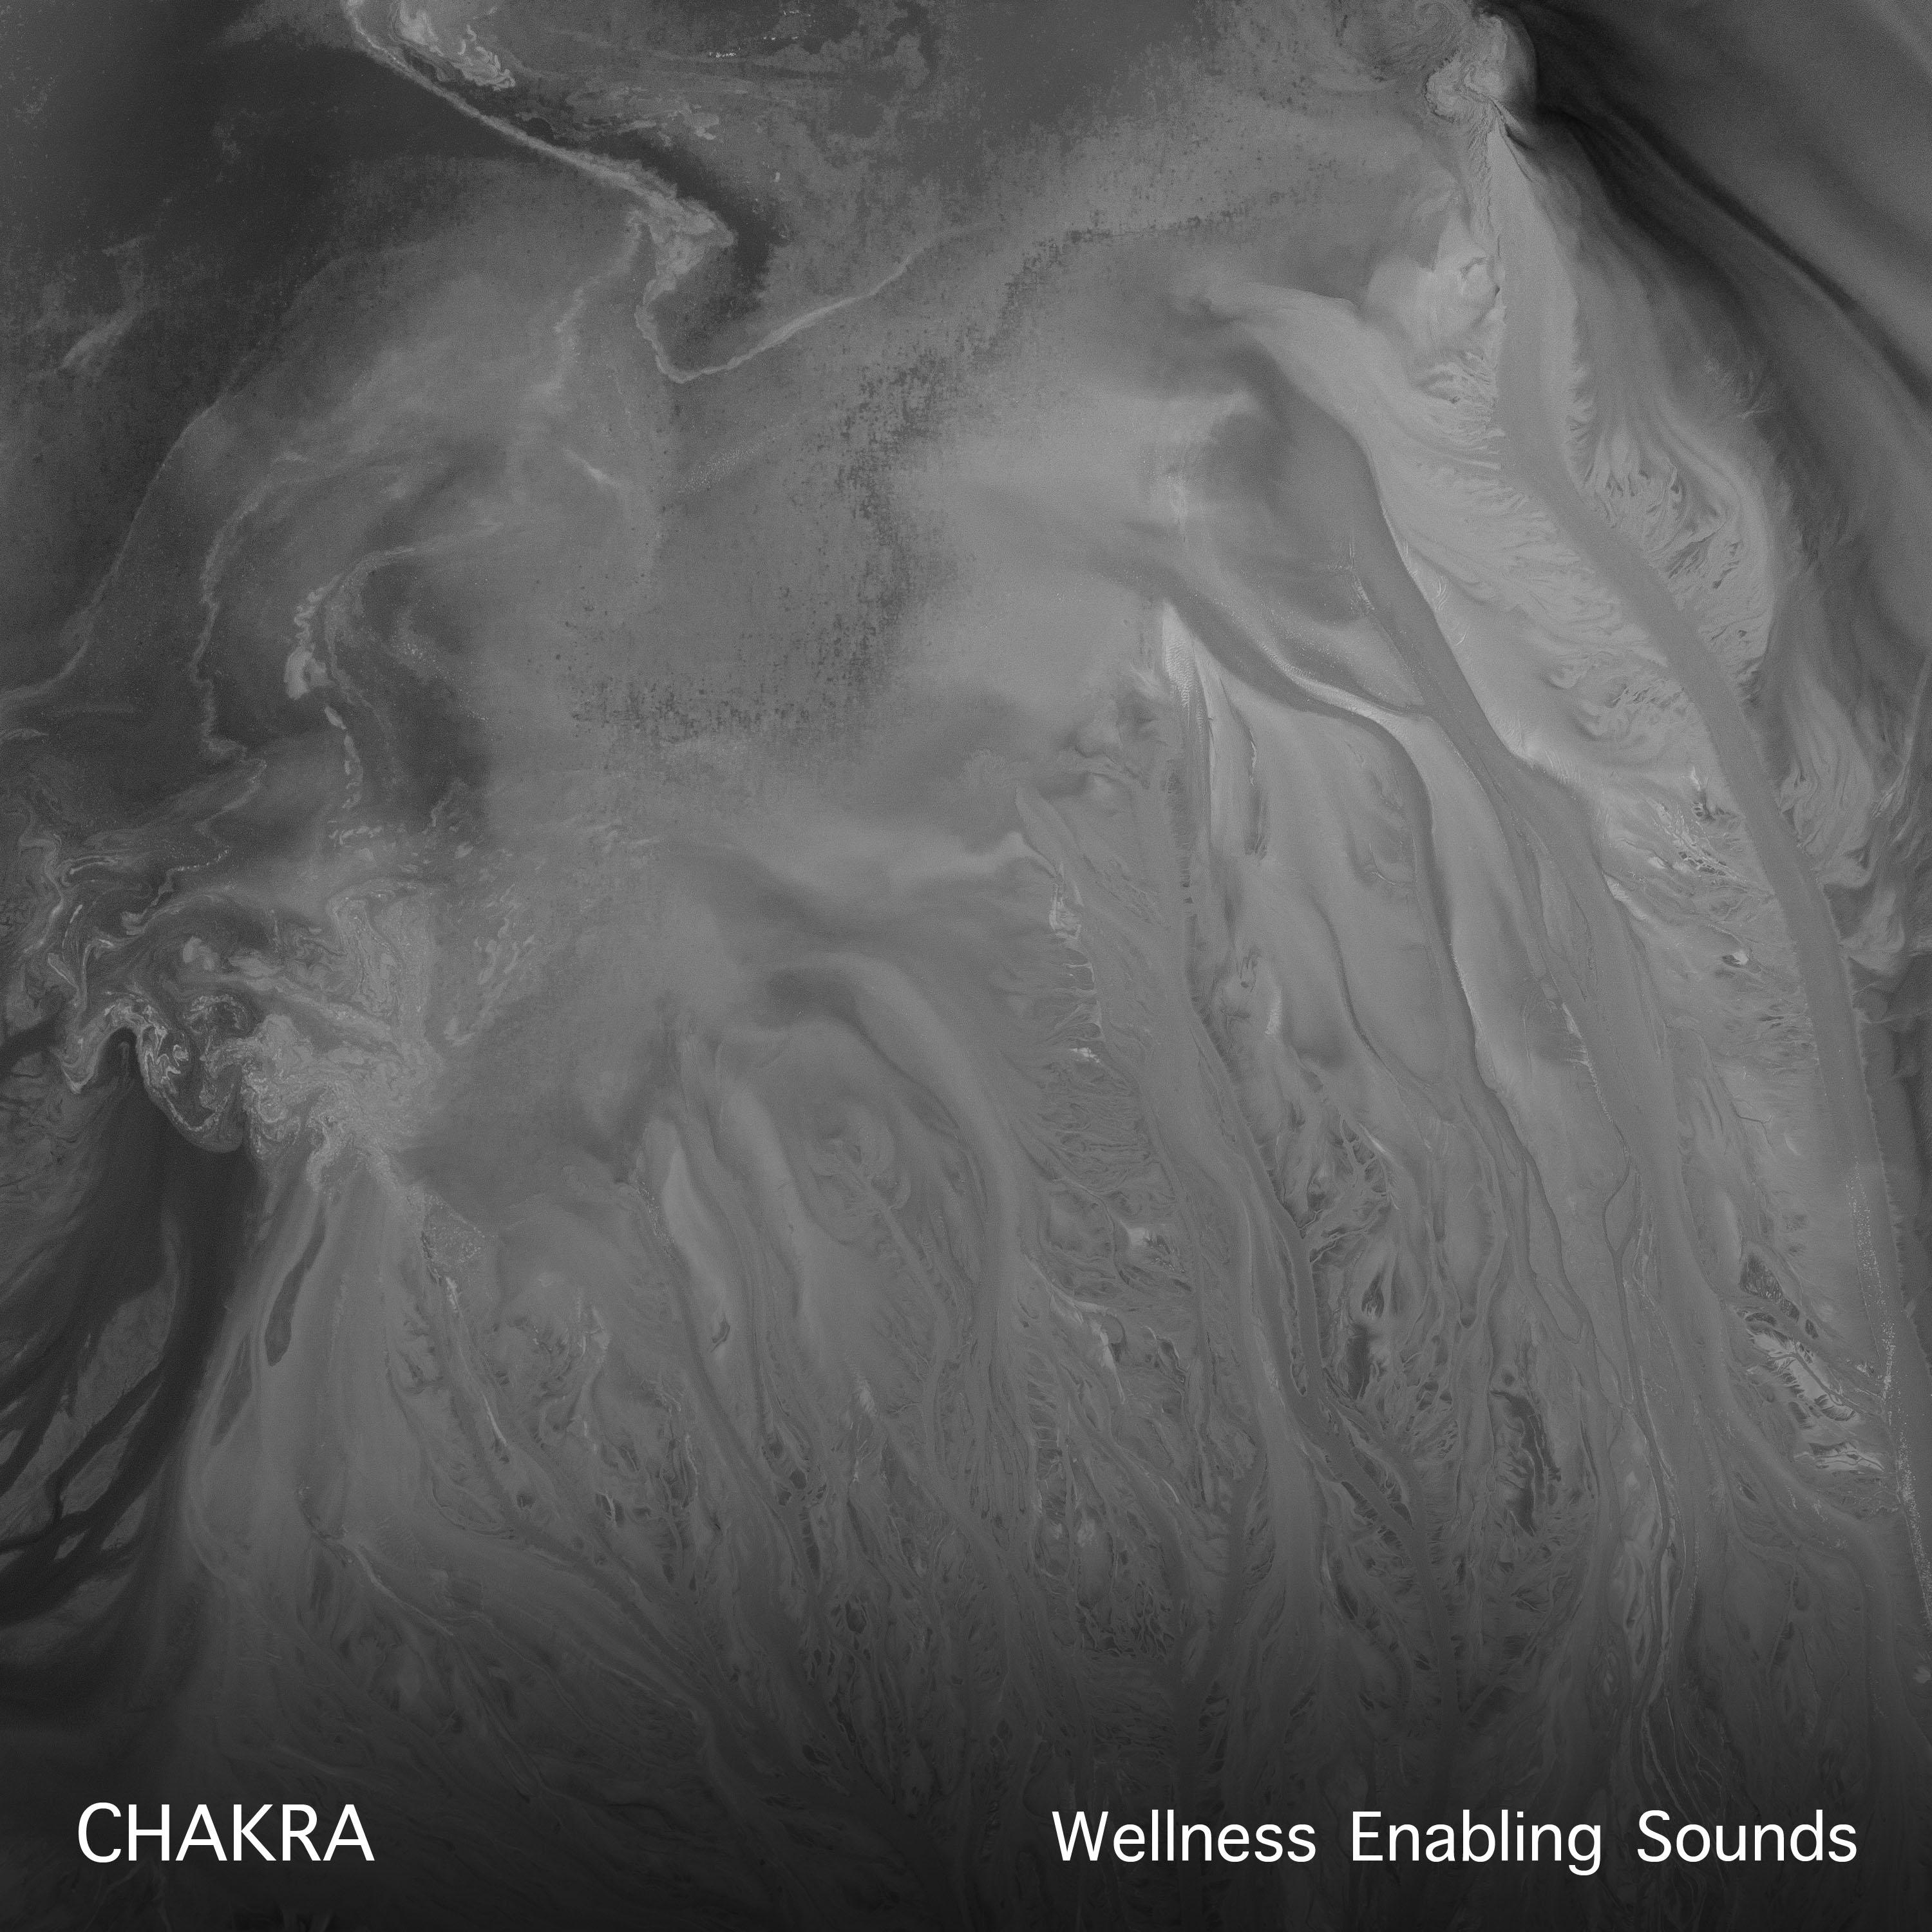 15 Chakra and Wellness Enabling Sounds